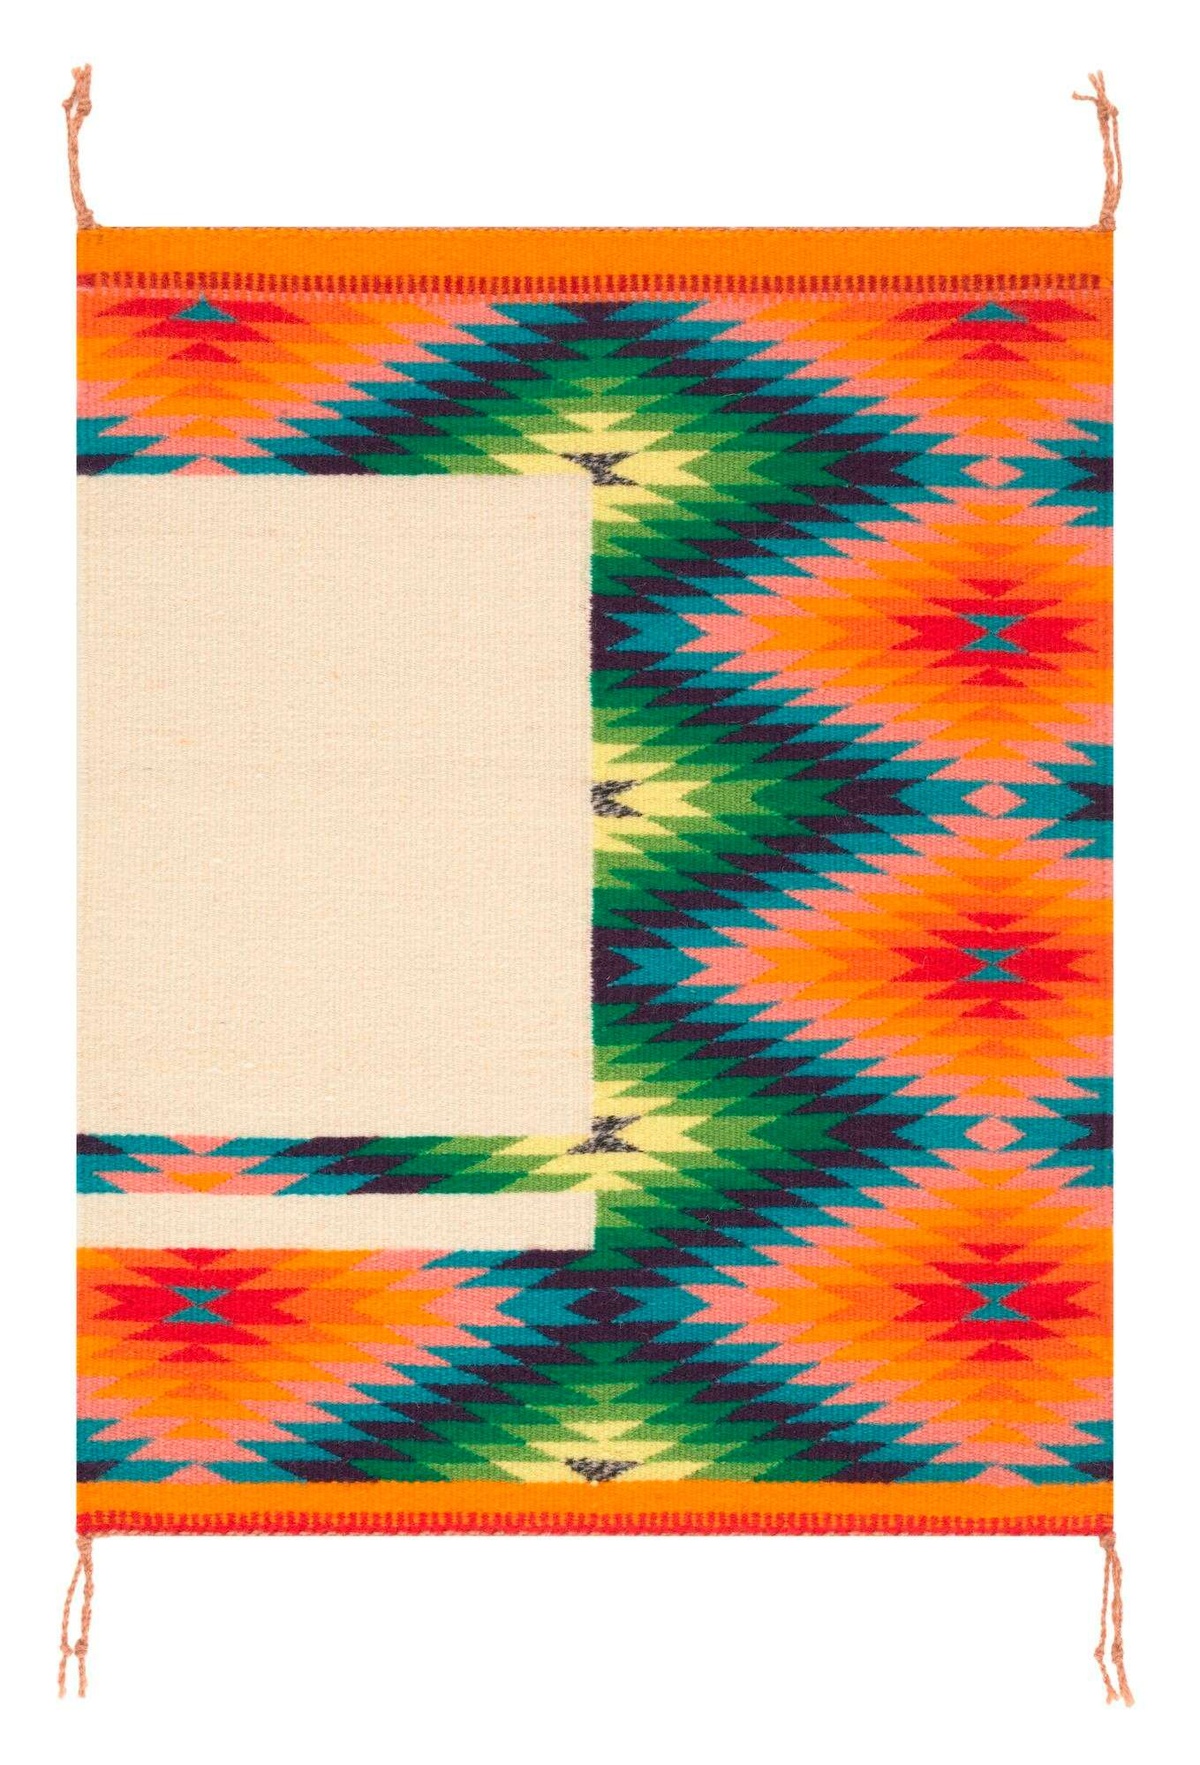 A vertical wall hanging woven by Melissa Cody. It has two pale beige colored blocks and a multicolored diamond-patterned background.